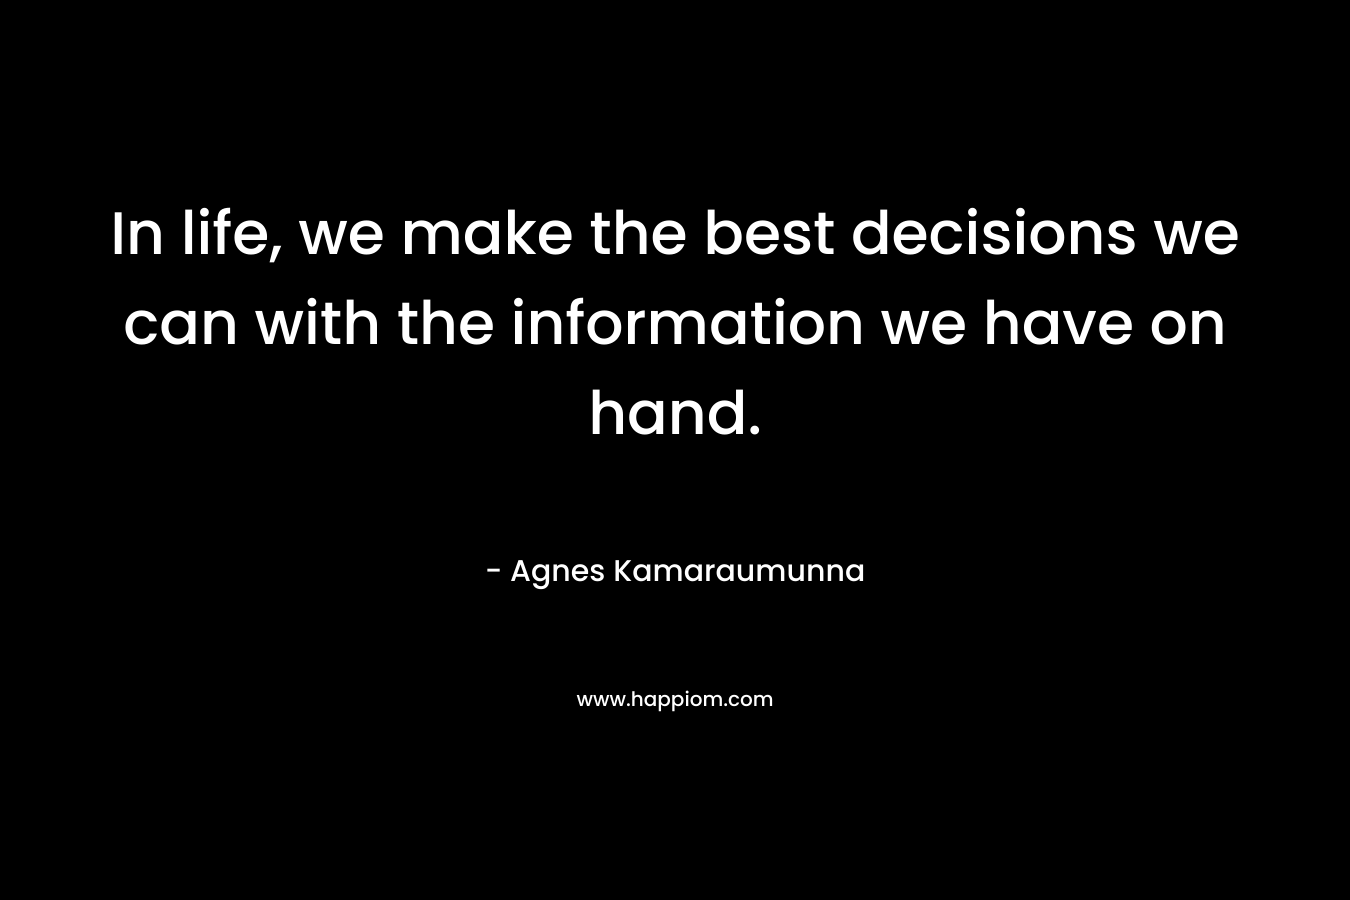 In life, we make the best decisions we can with the information we have on hand. – Agnes Kamaraumunna